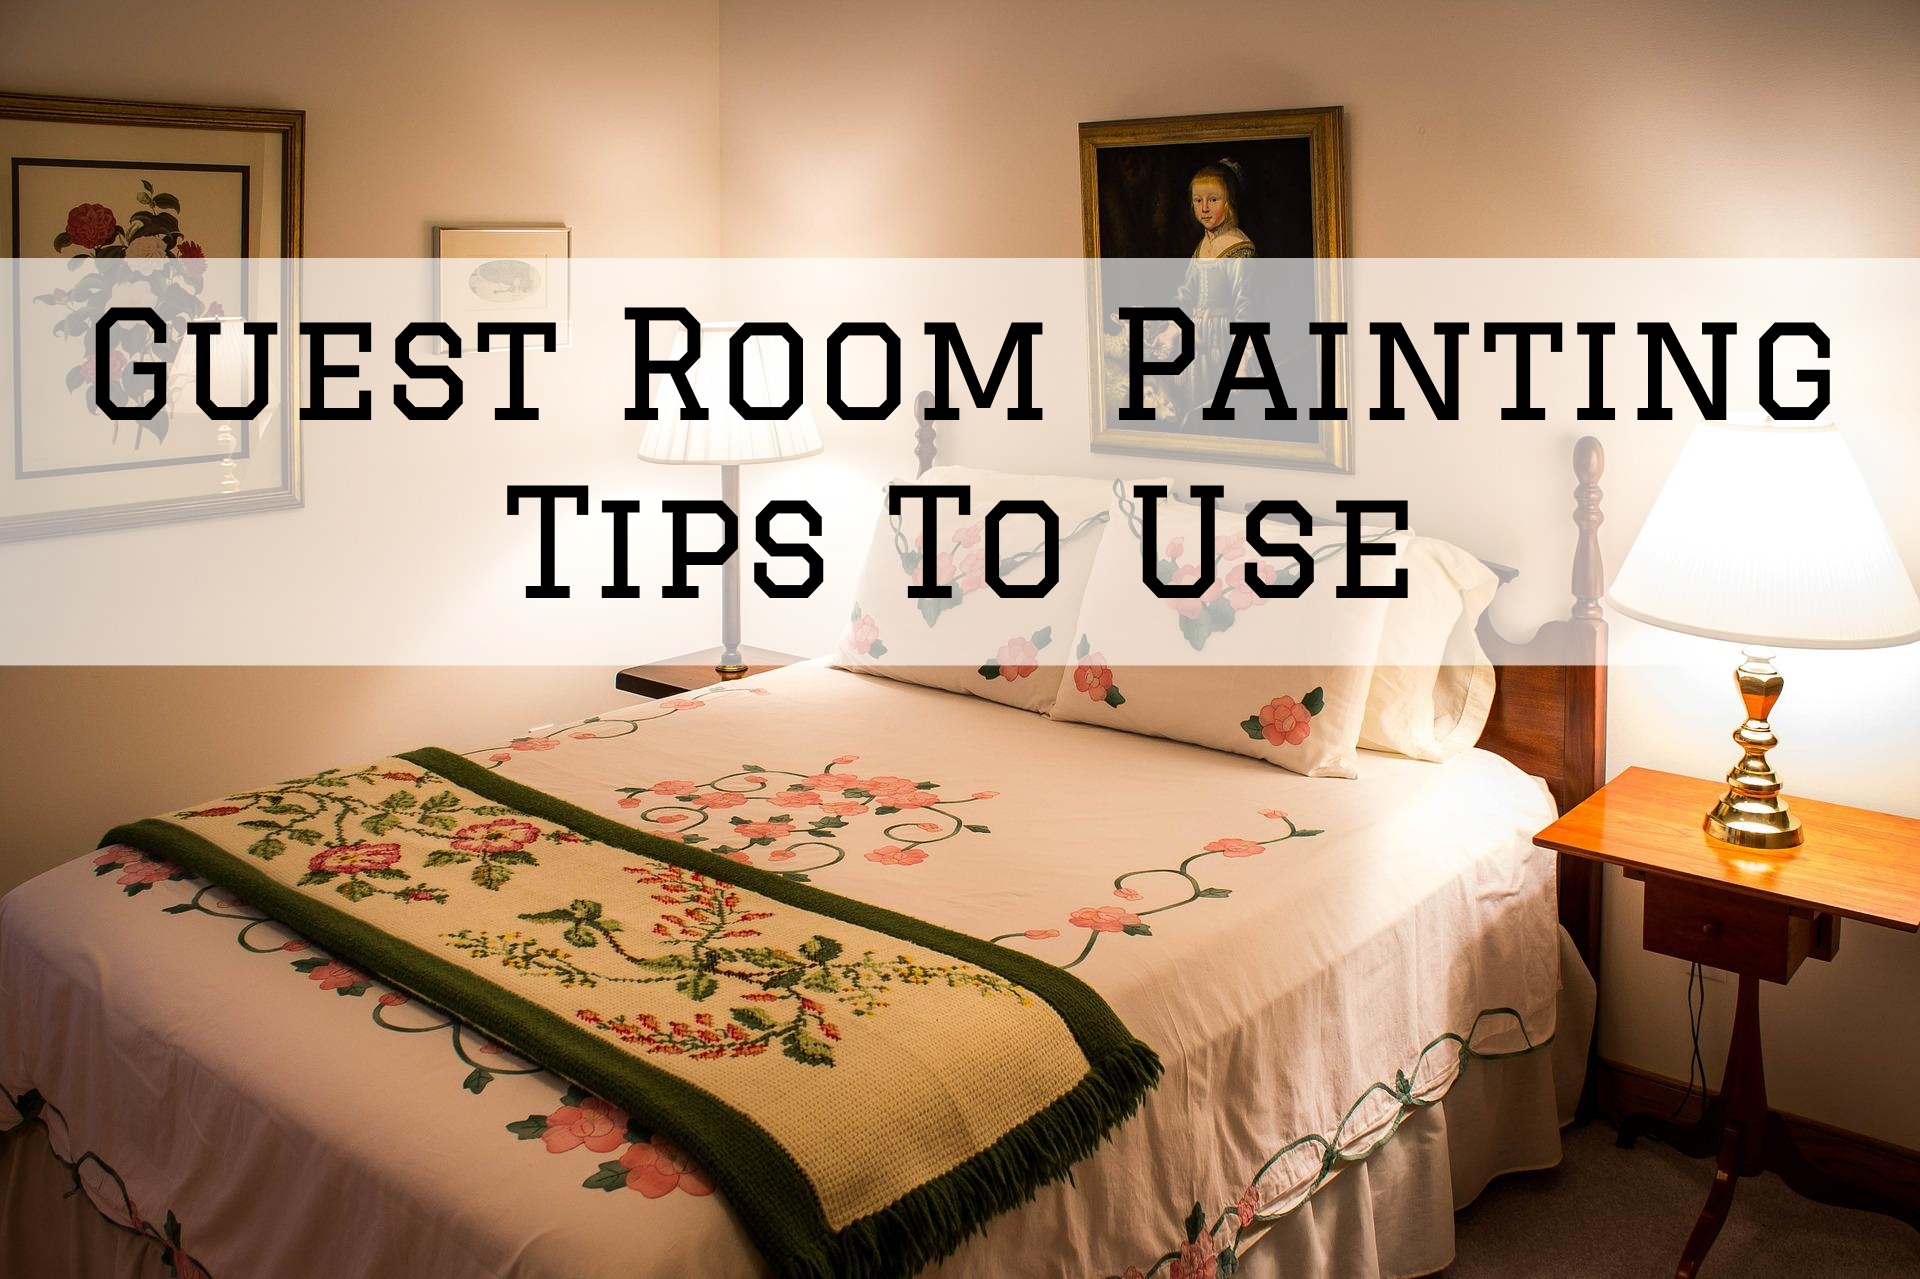 2022-08-16 Left Moon Painting Kennett Square PA Guest Room Painting Tips